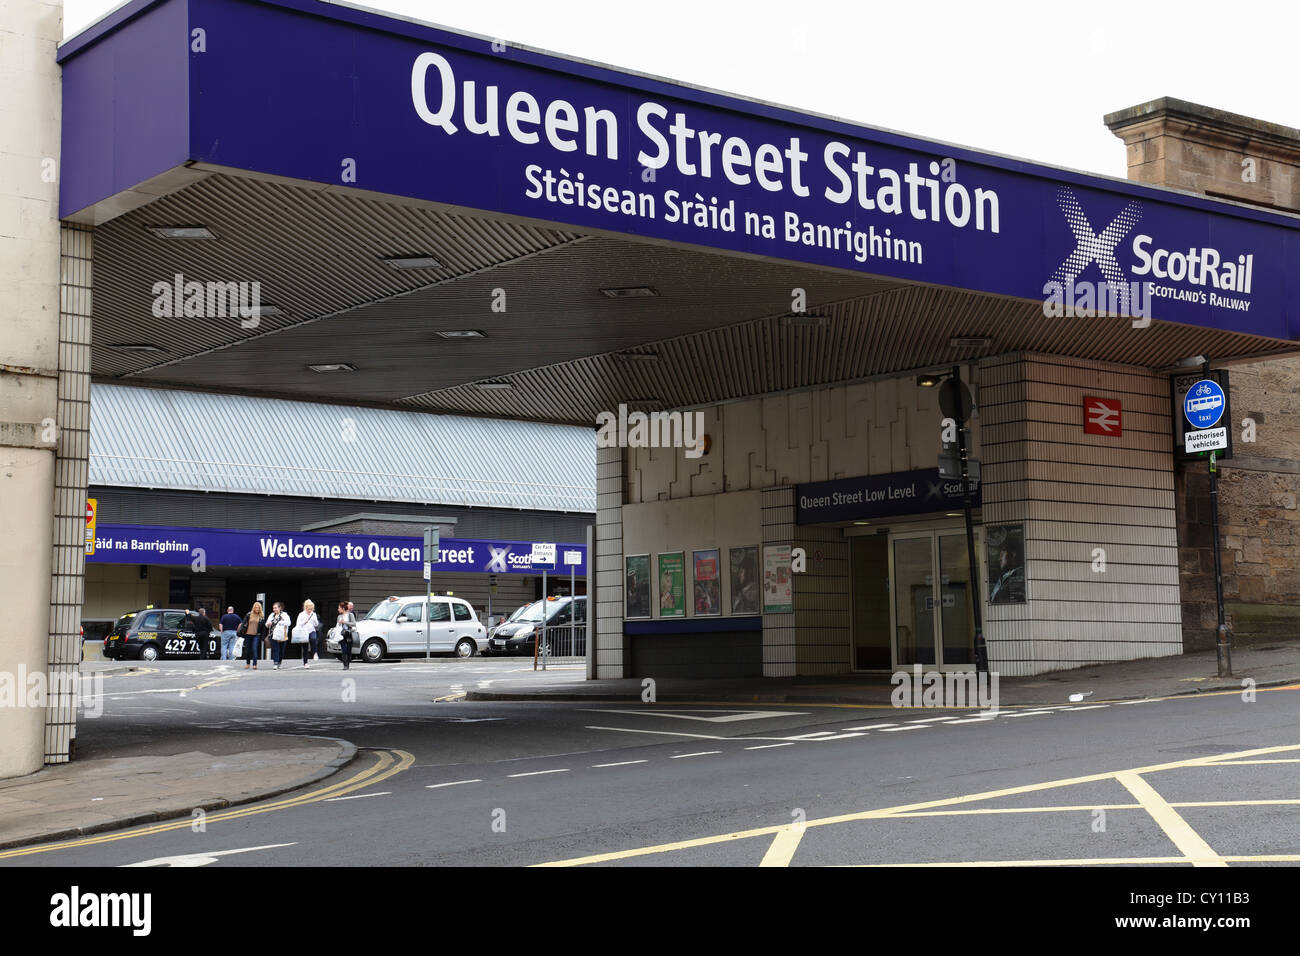 Queen Street Station vehicle and pedestrian entrance on North Hanover Street in Glasgow city centre, Scotland, UK Stock Photo